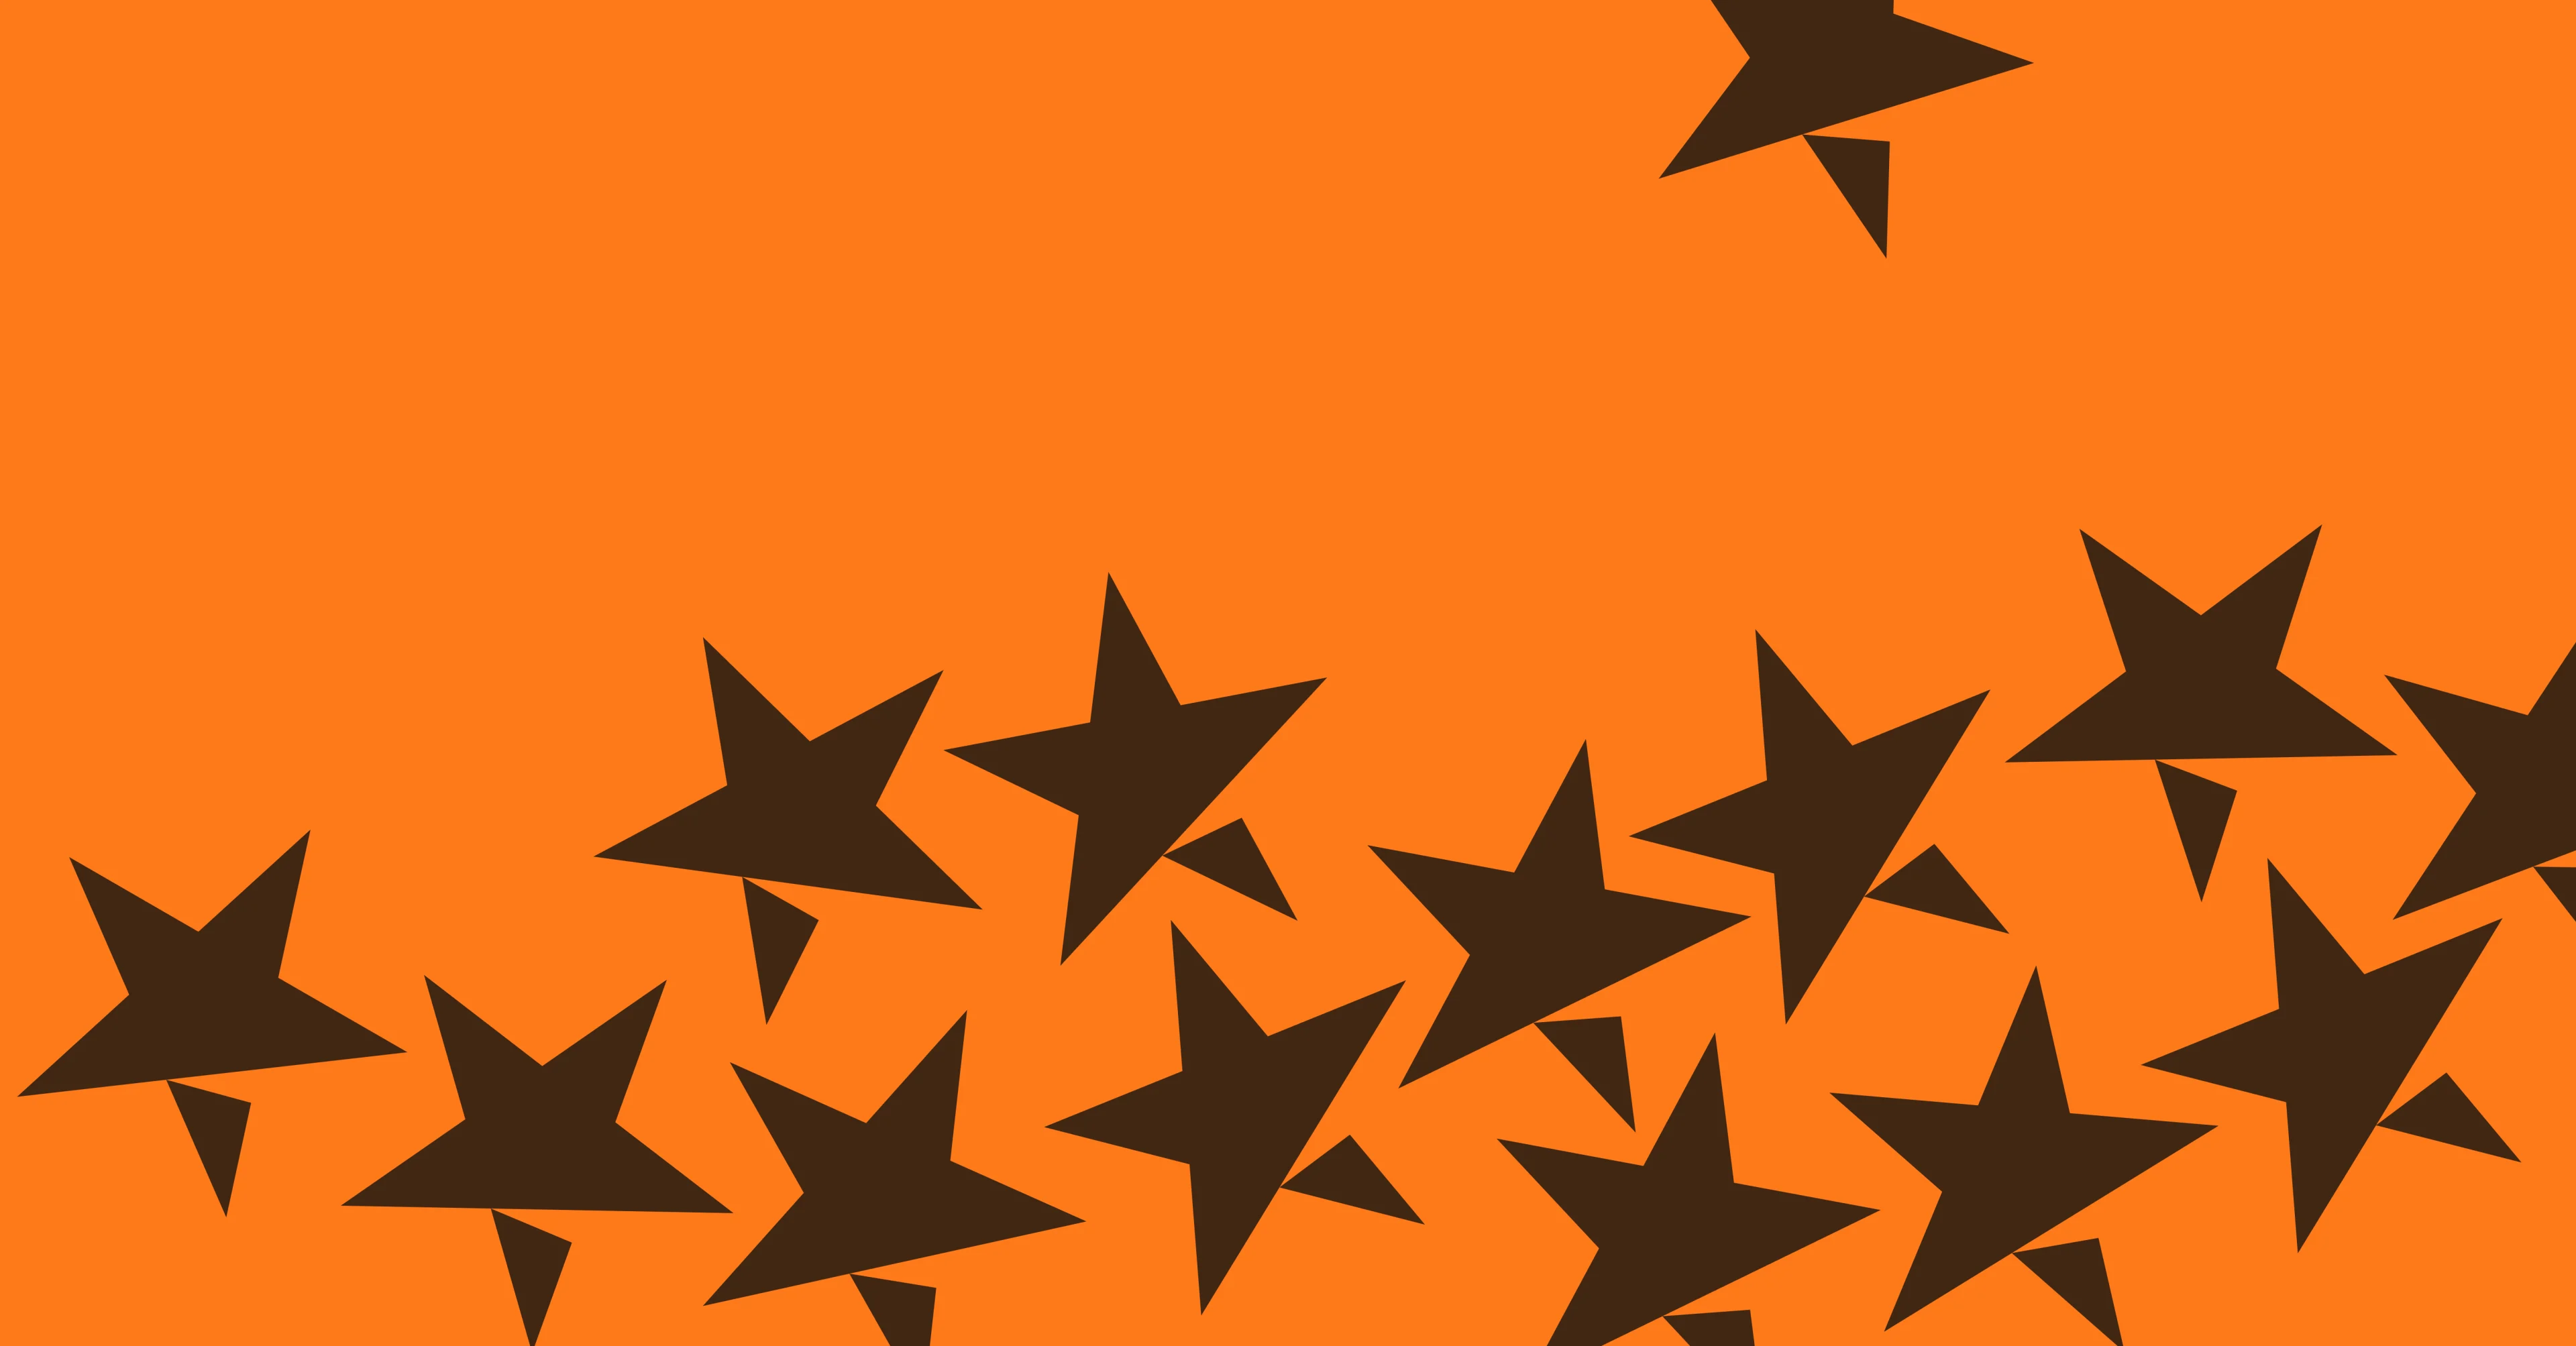 Do's and Don'ts best practices trustpilot guide